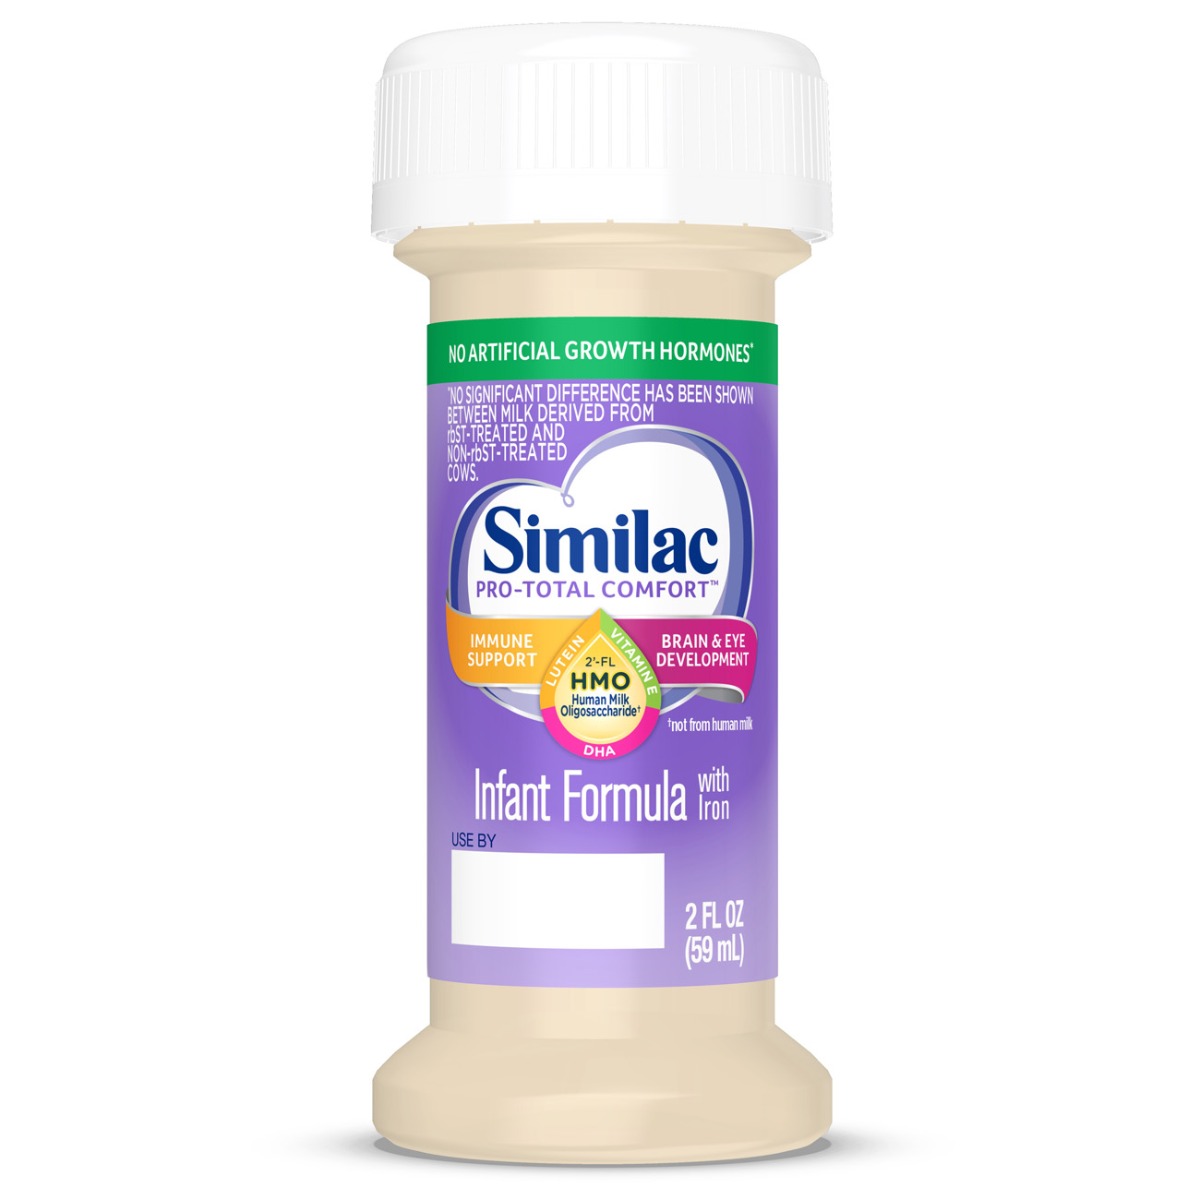 https://www.similac.com/content/dam/an/similac/global/products/67132/pro-total-comfort-2-oz_bottle.jpg